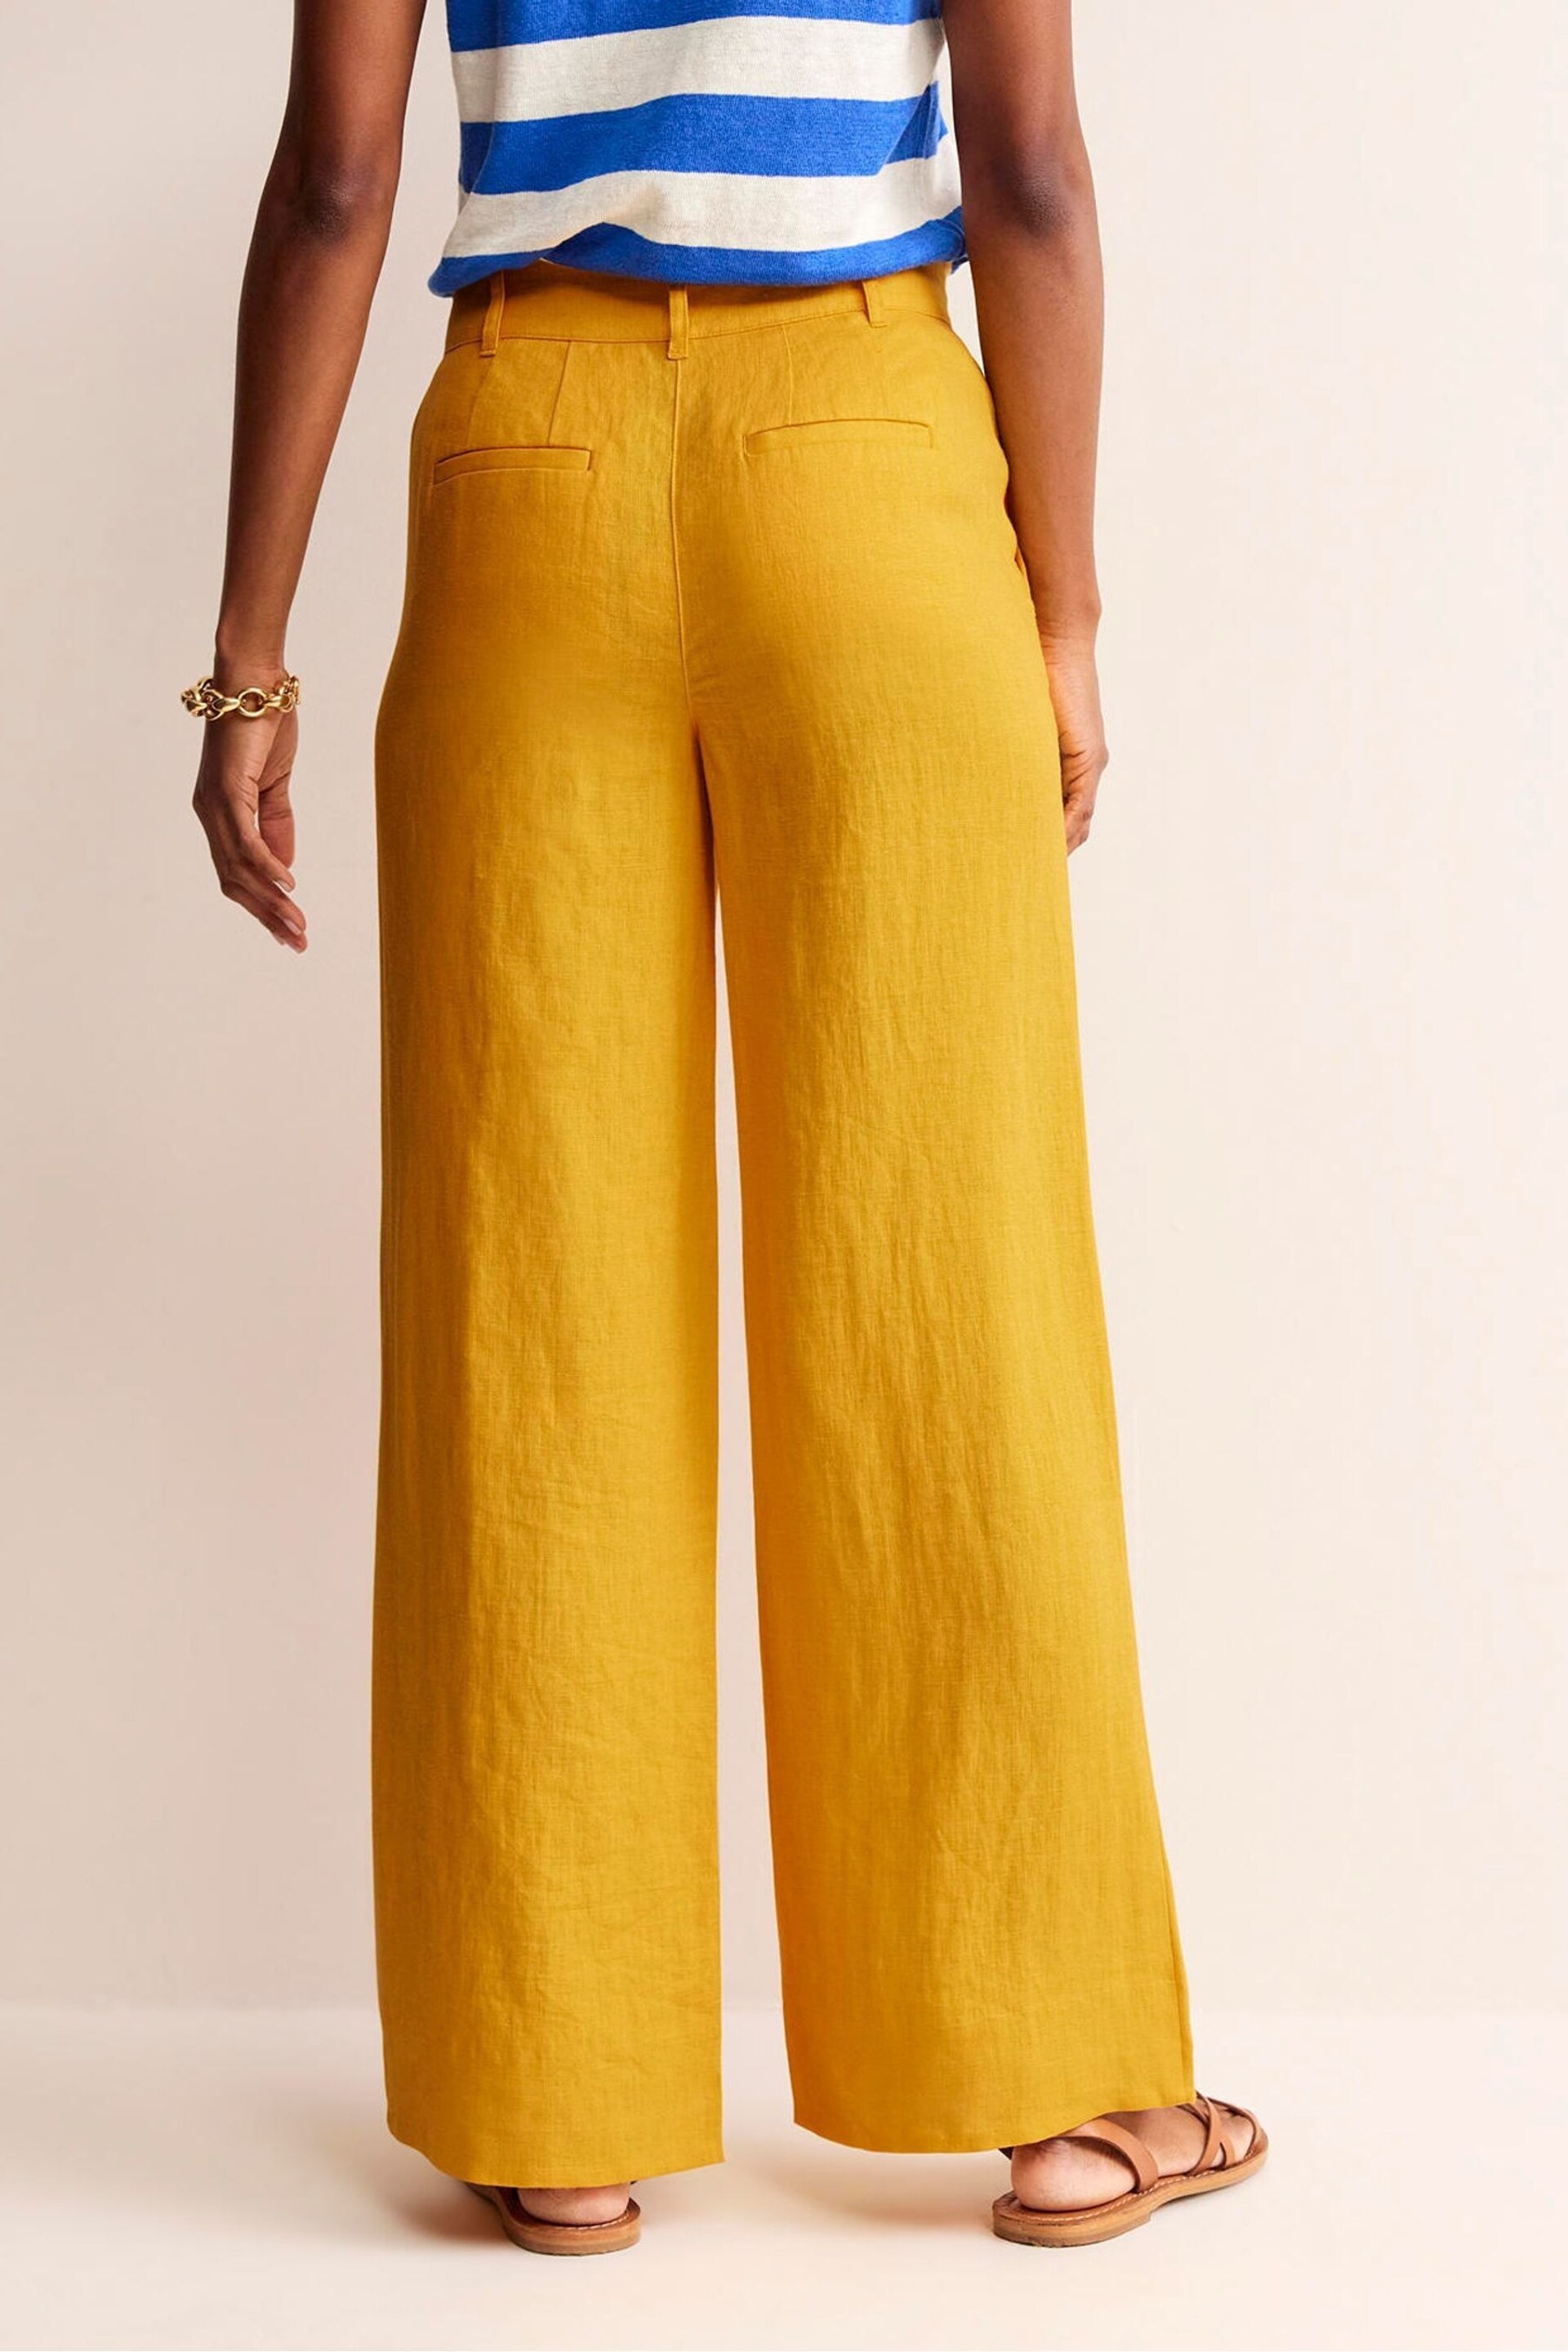 Boden Yellow Petite Westbourne Linen Trousers - Image 3 of 5